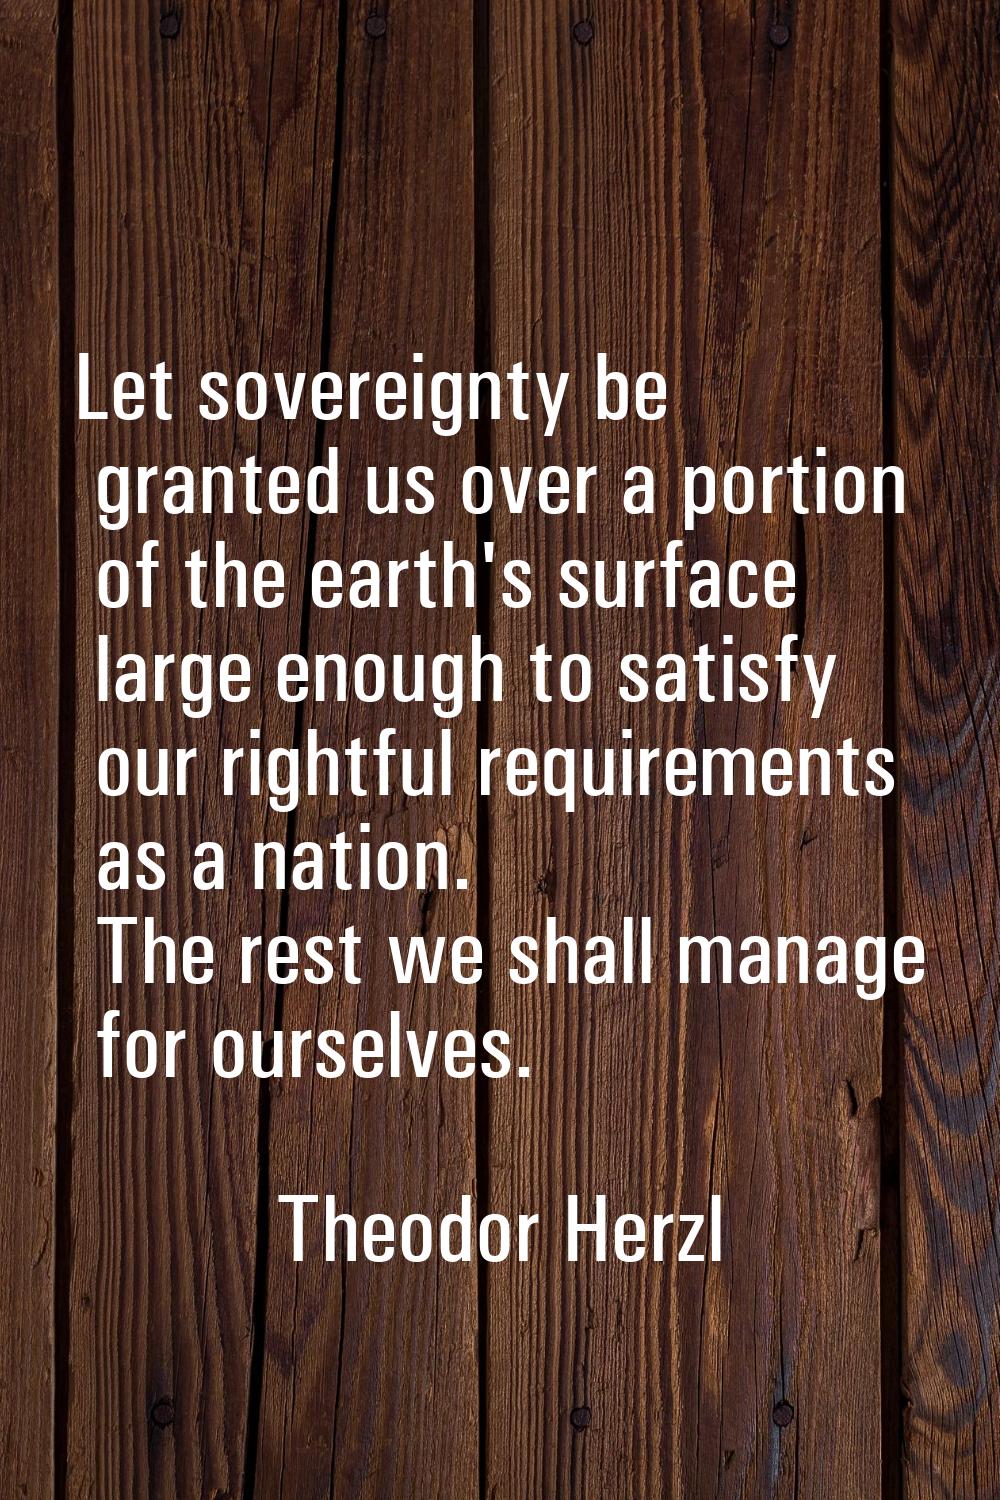 Let sovereignty be granted us over a portion of the earth's surface large enough to satisfy our rig